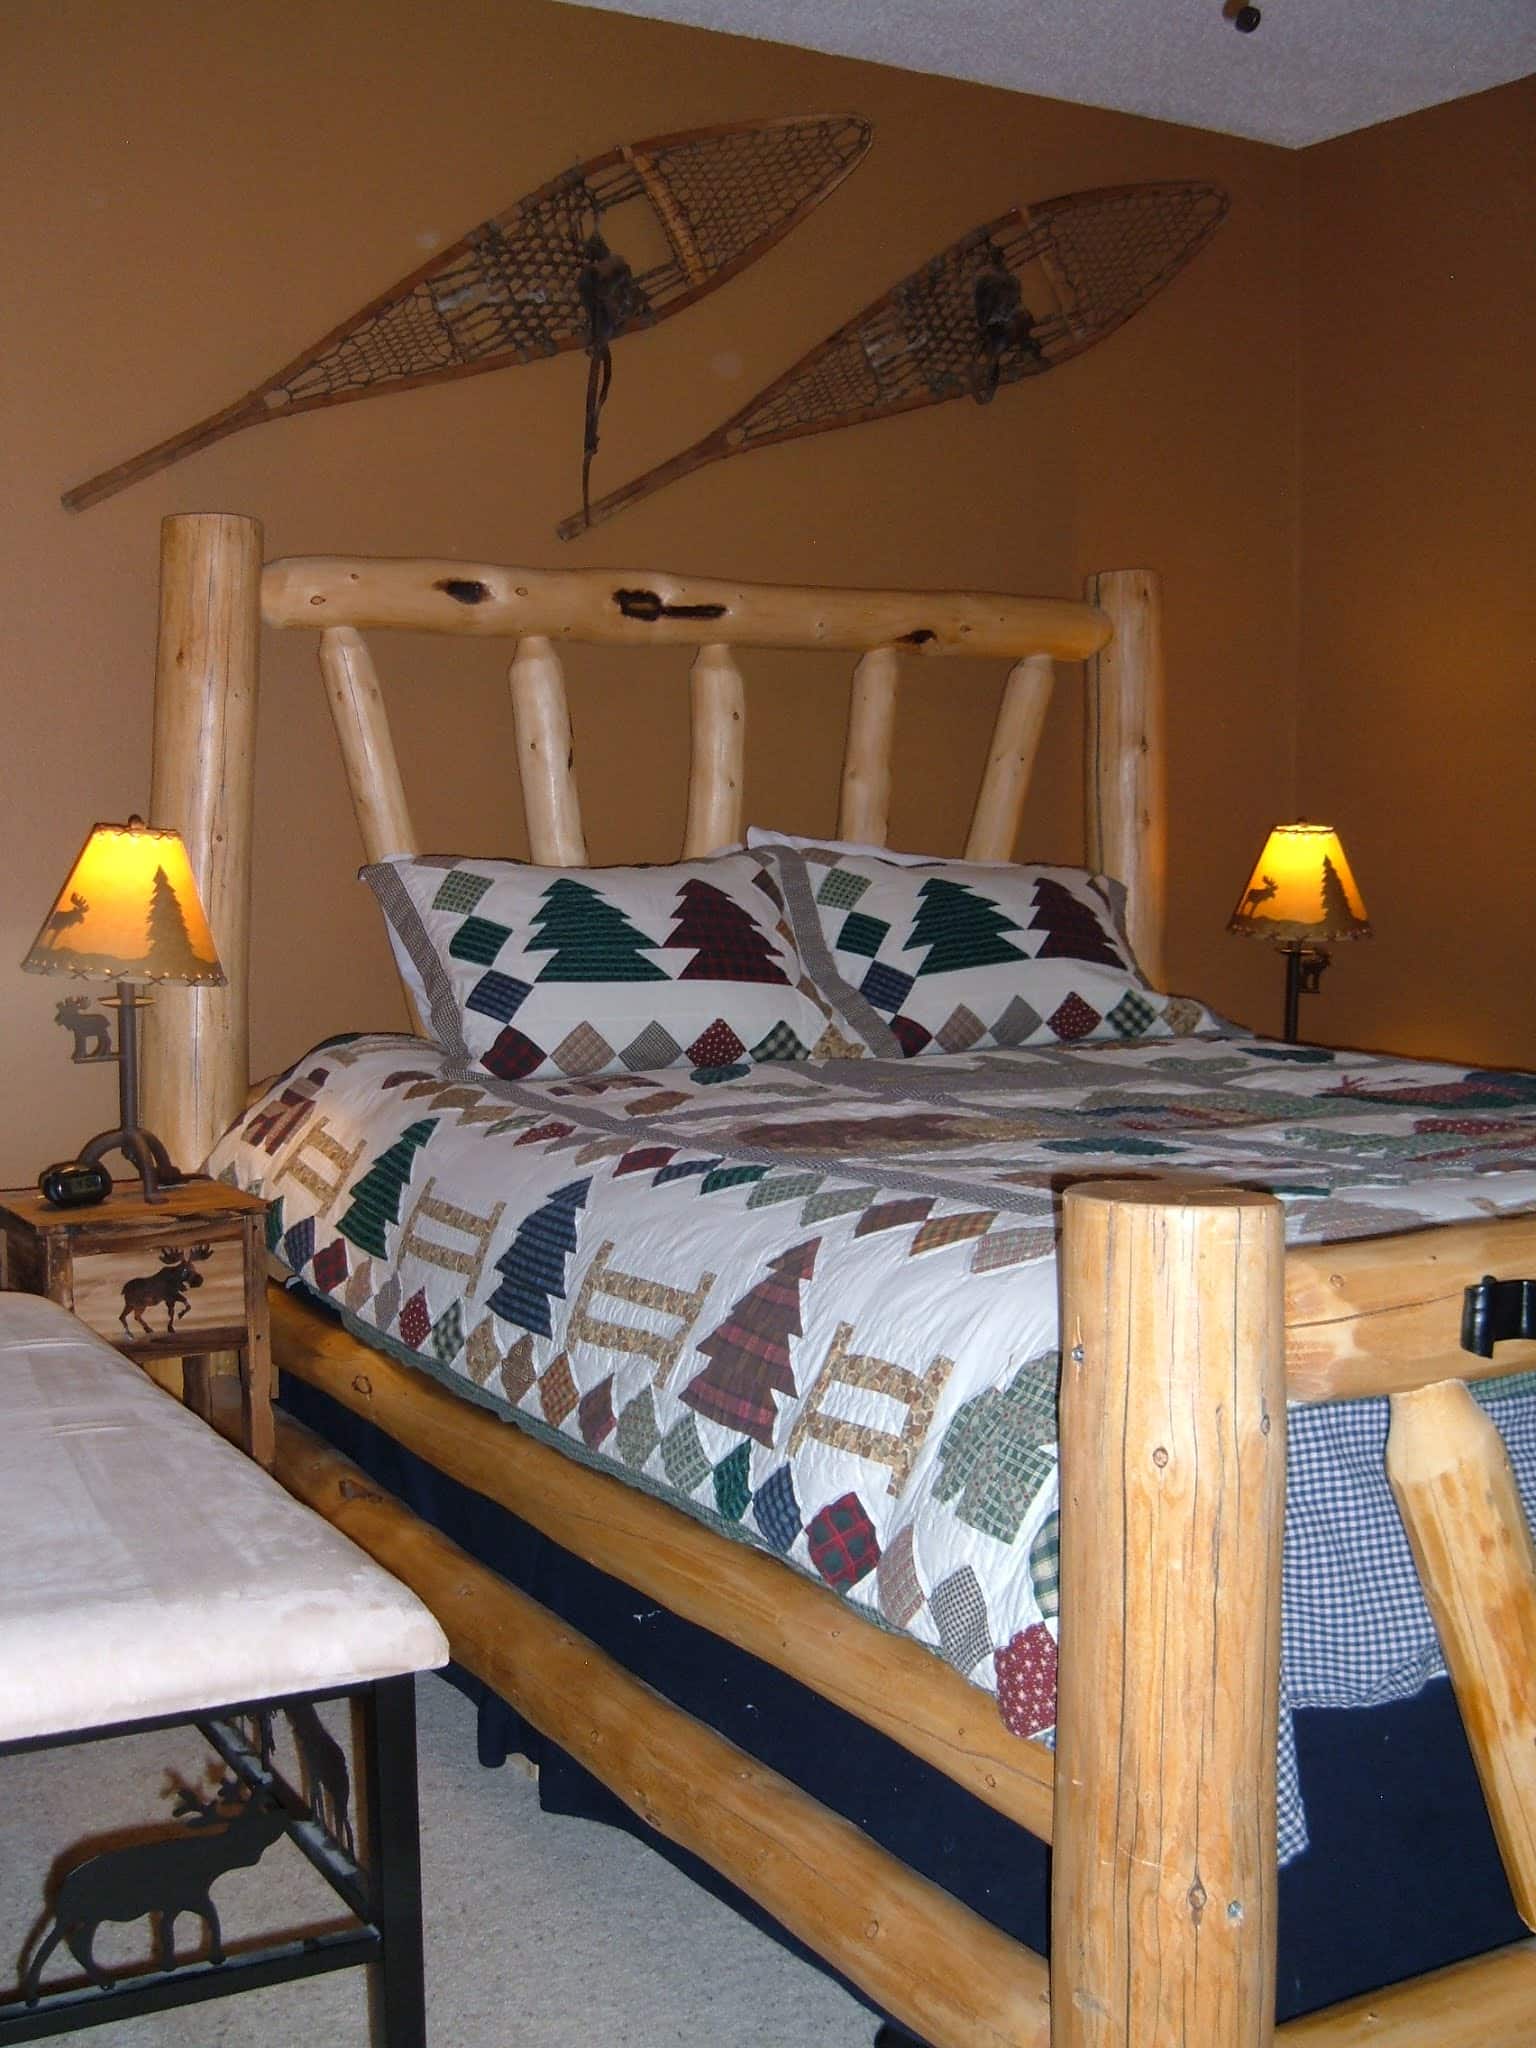 Bedroom with a beautiful queen size log bed, down comforter, tan walls, and a ceiling fan.